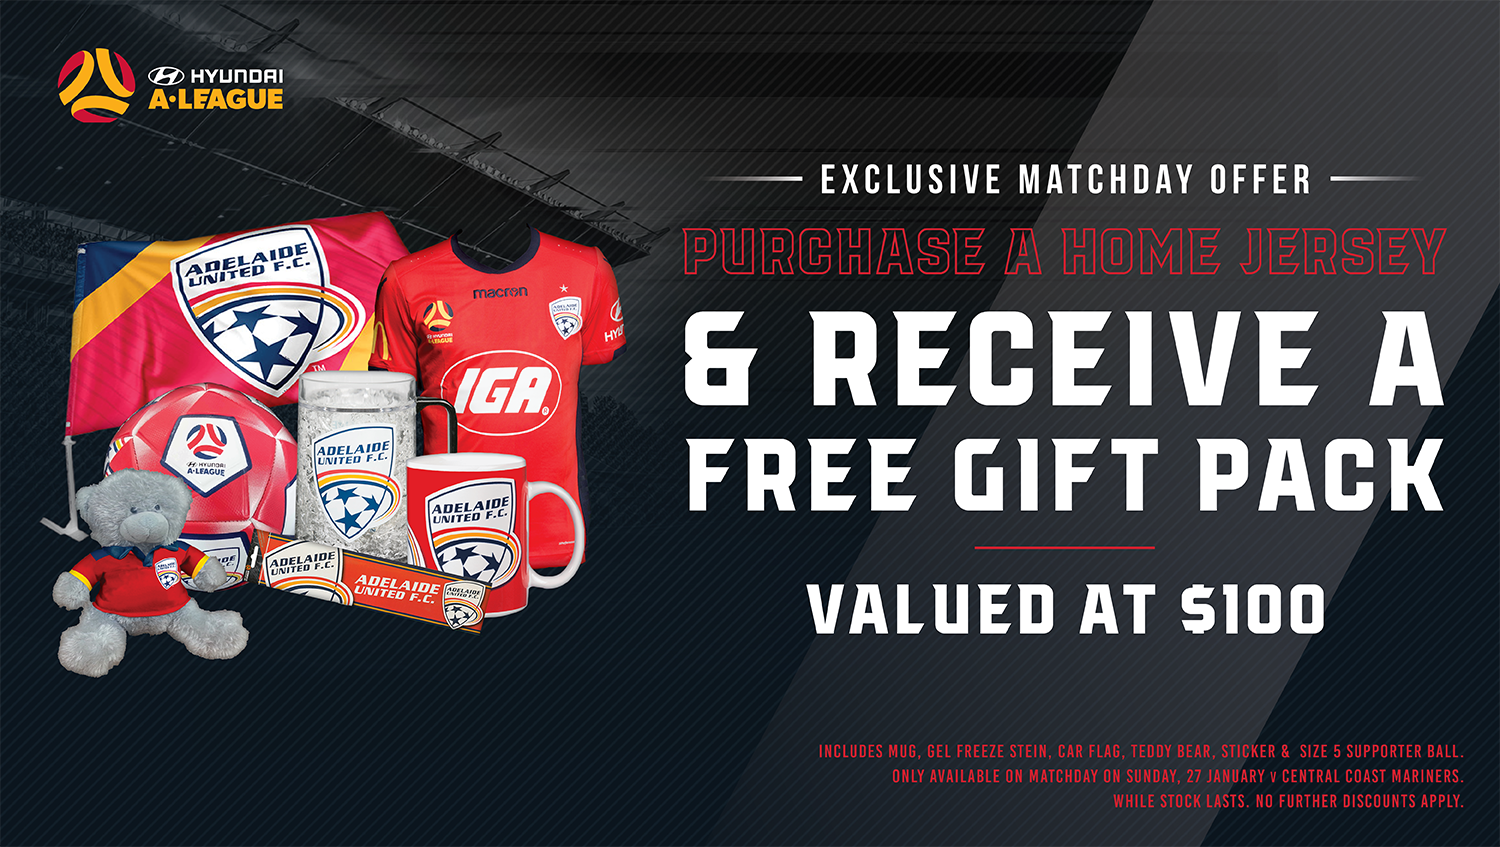 Adelaide United match day merchandise offer